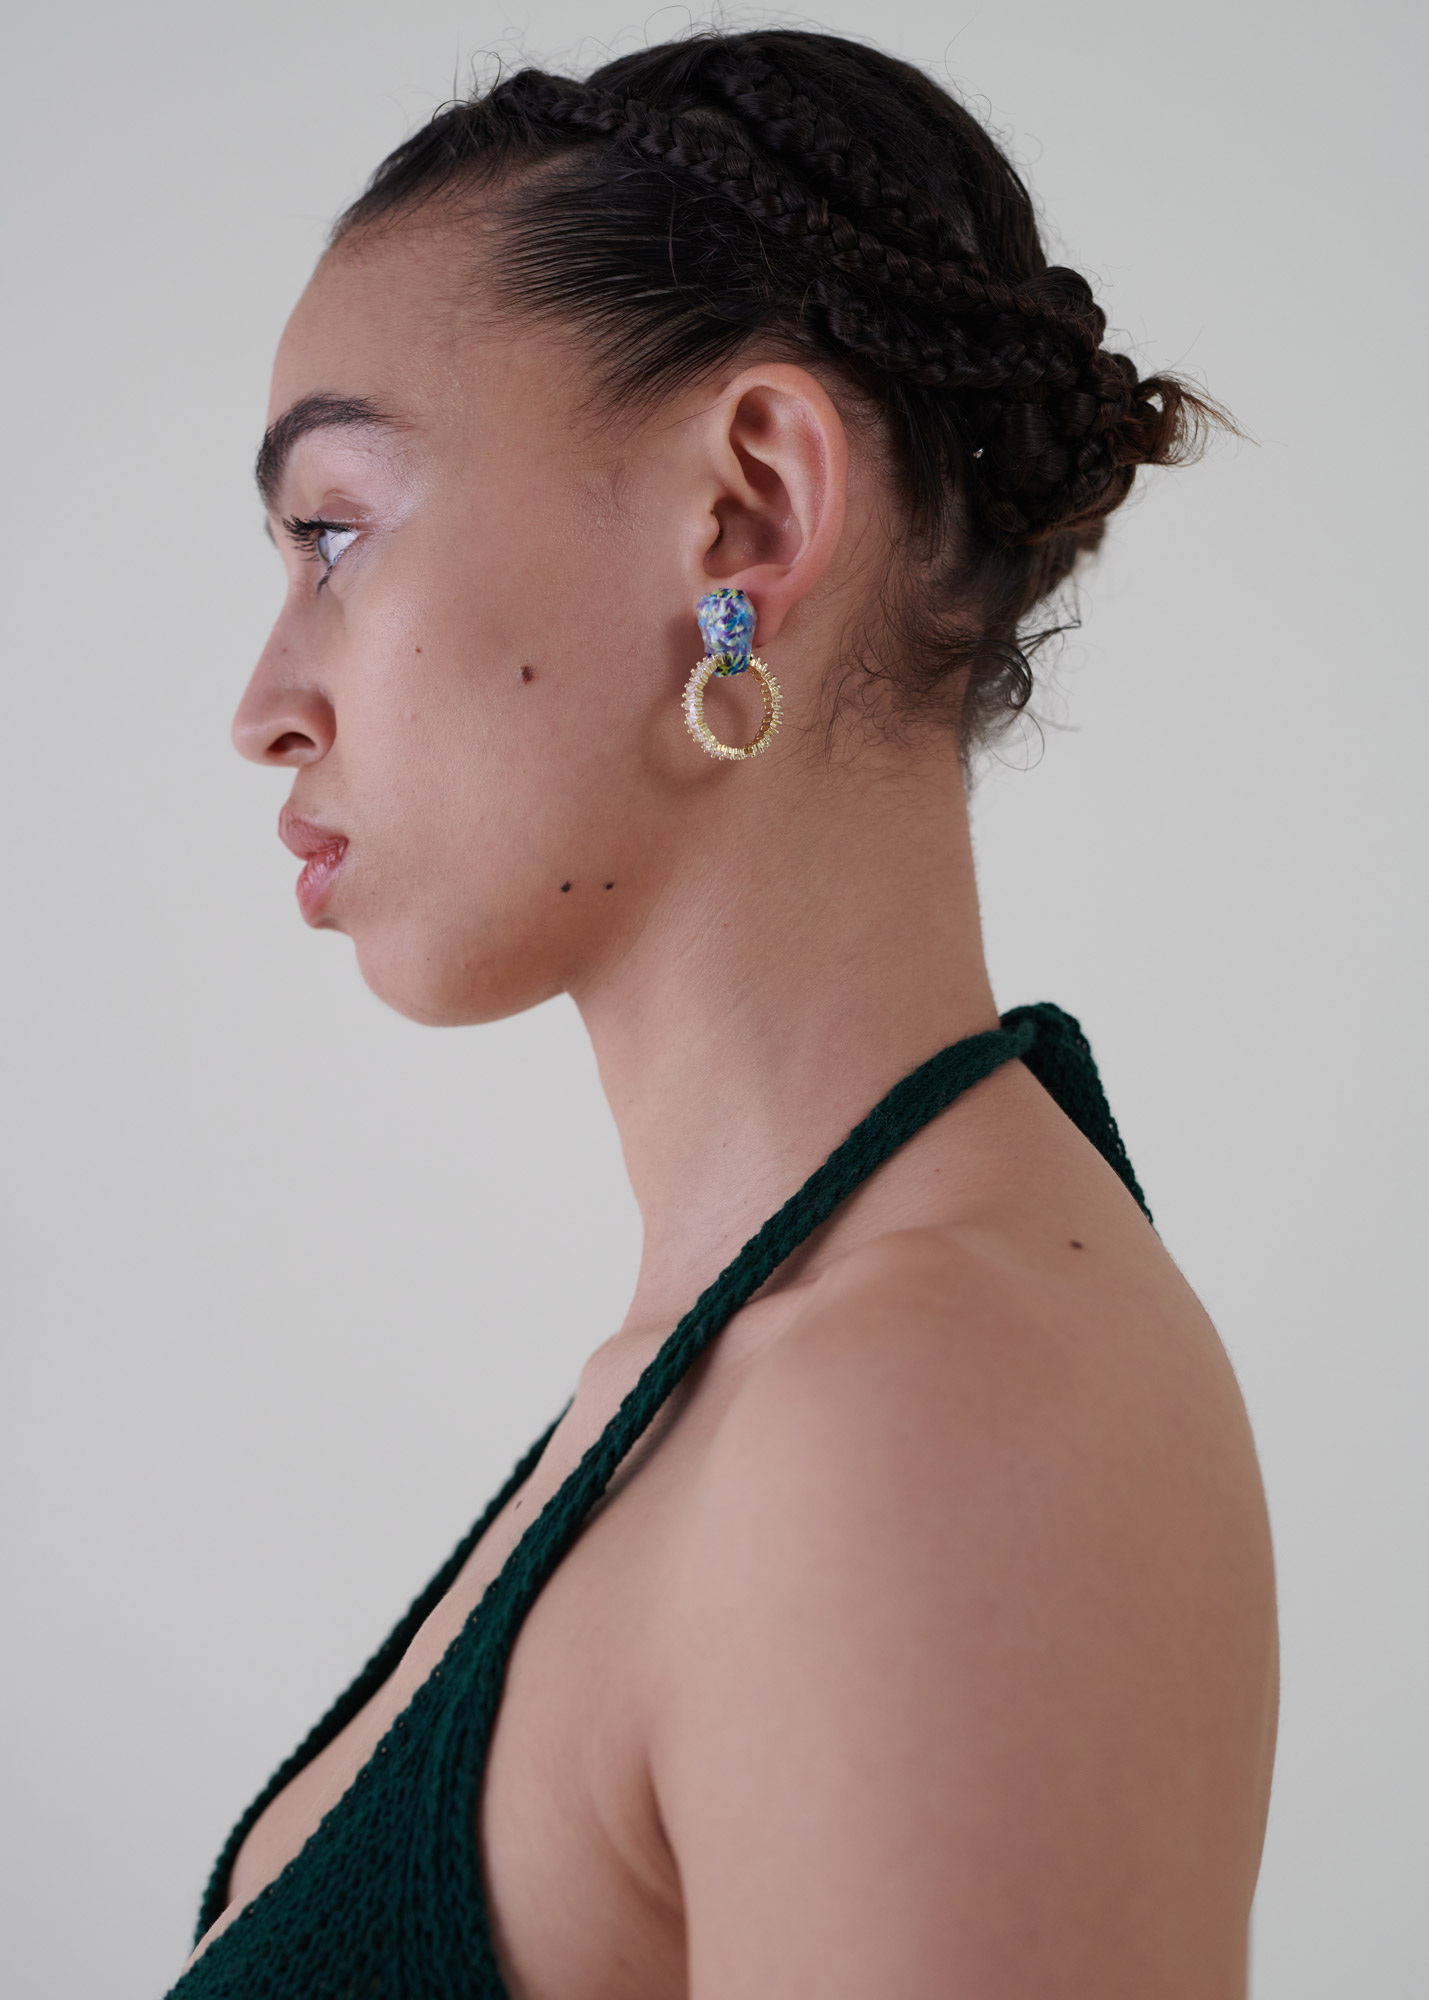 Sustainable fashion and jewlery with upcycled zirconia ring from Aldwin Teva William